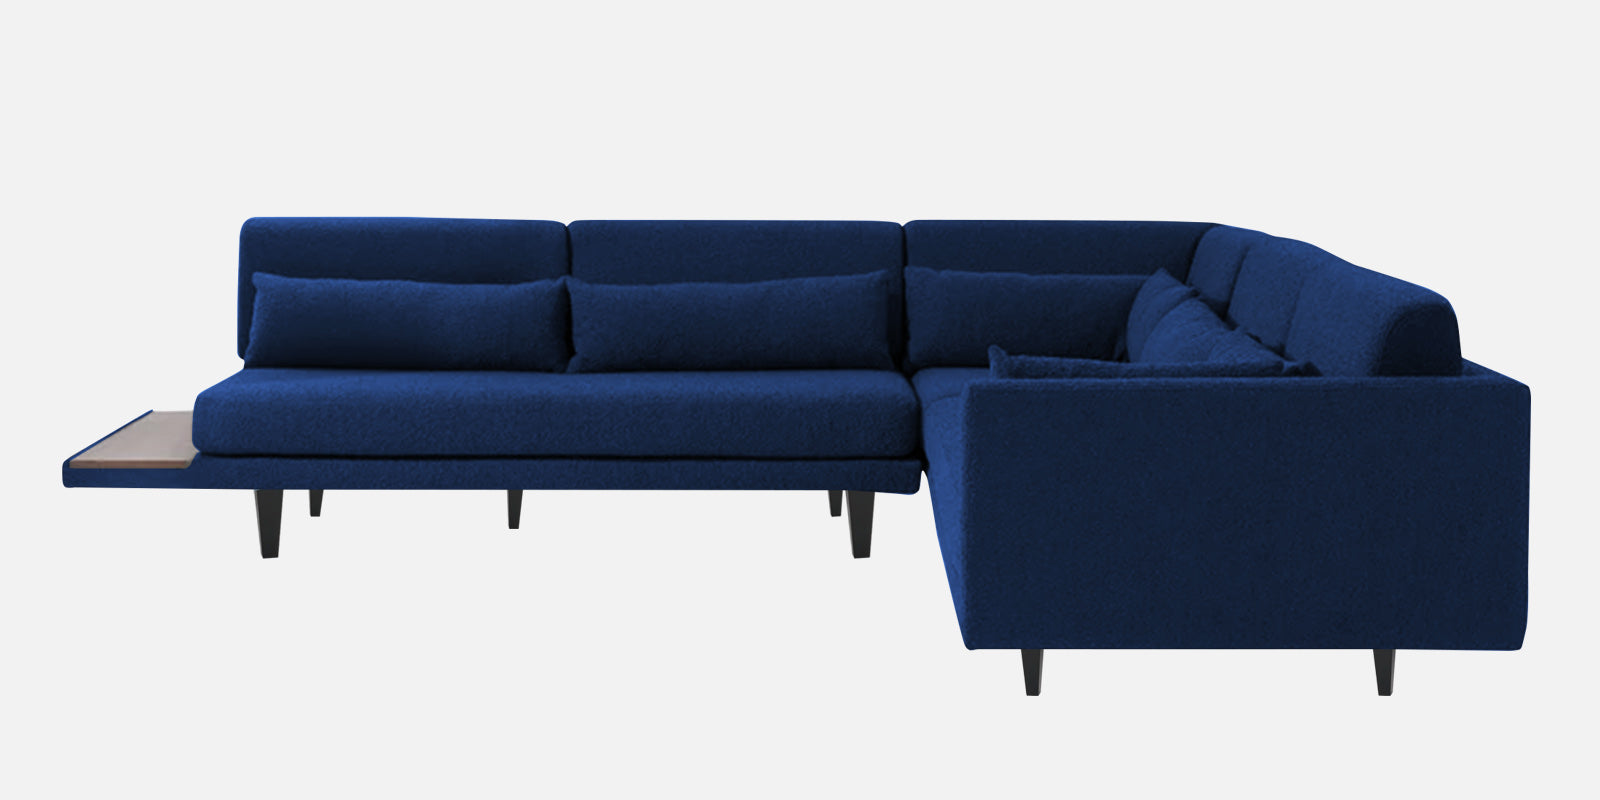 Malta Fabric 6 Seater RHS Sectional Sofa In Royal Blue Colour